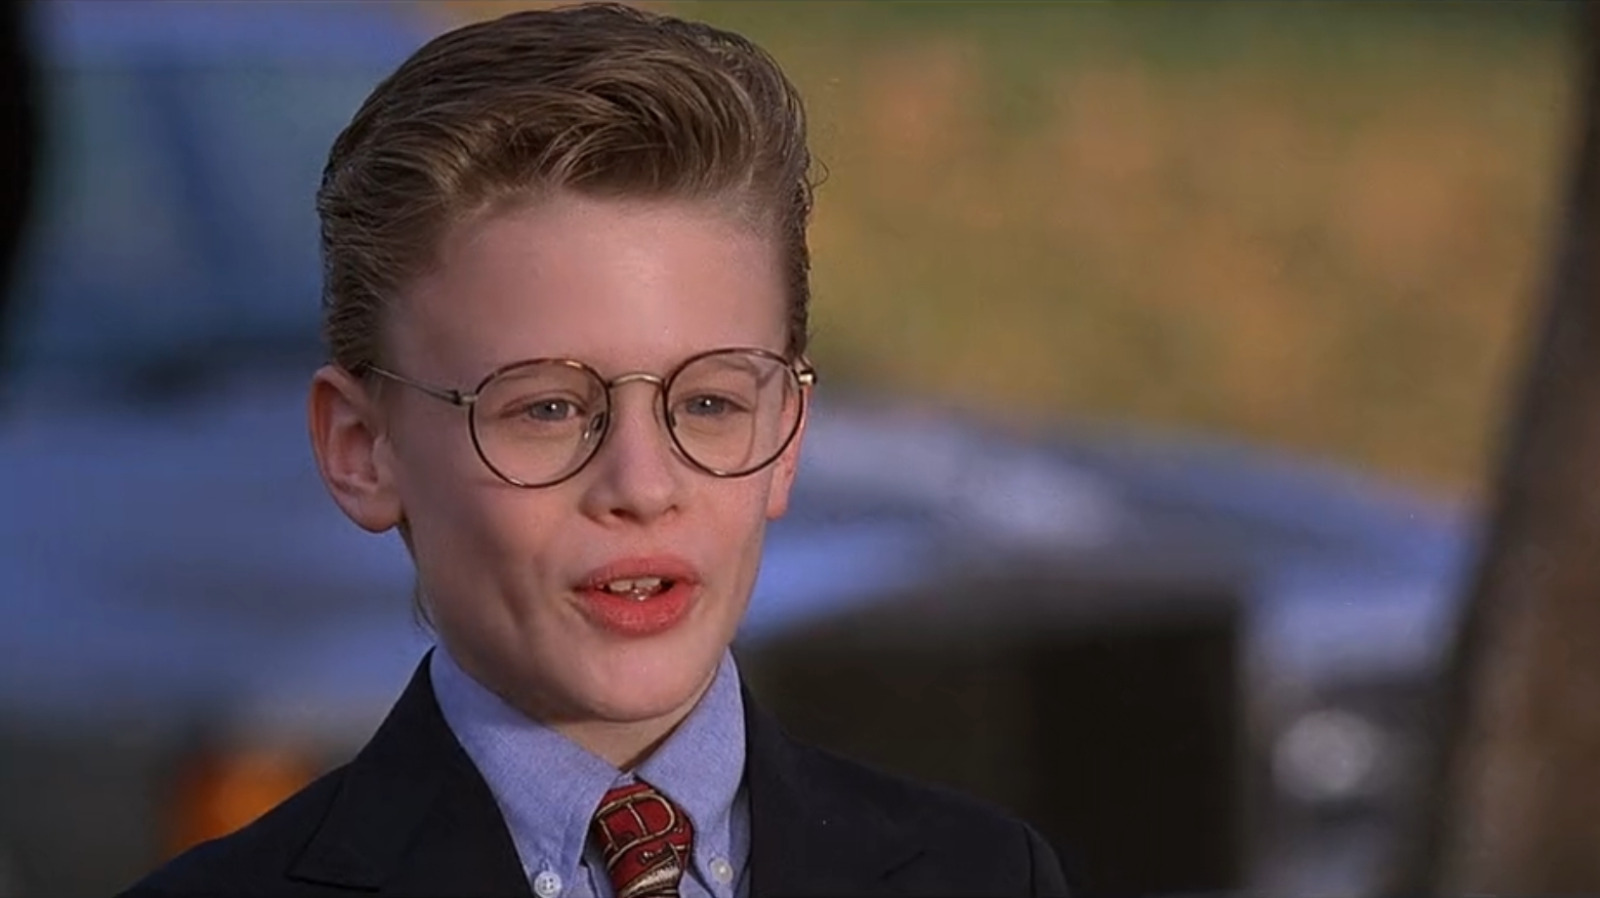 Waldo From The Little Rascals Is Unrecognizable Now